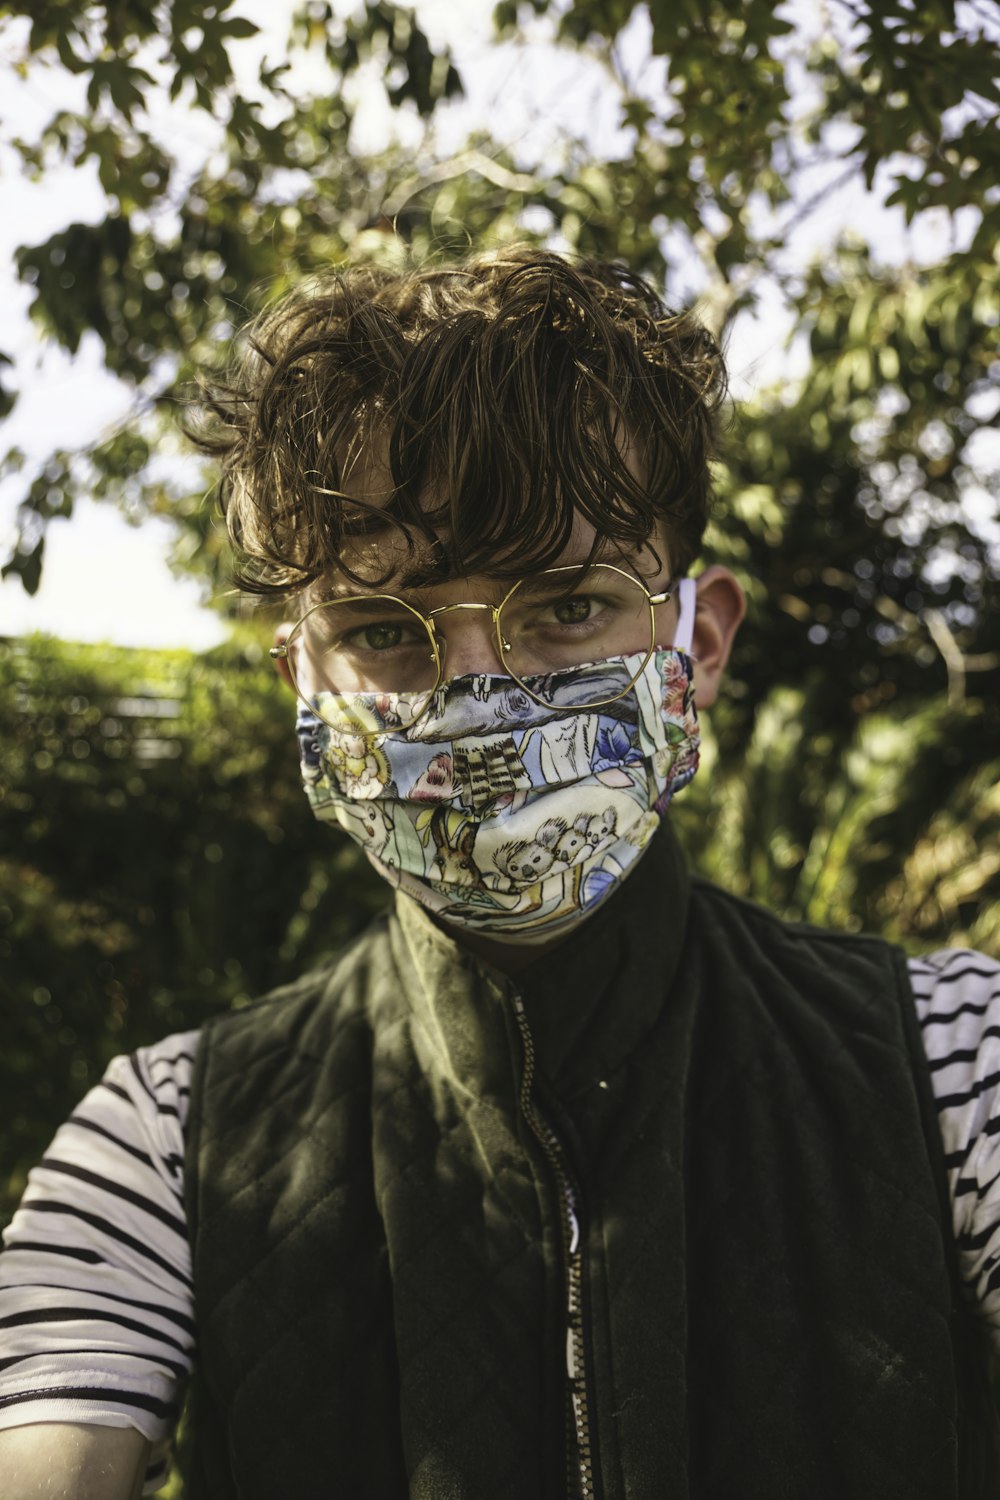 Boy With Mask Pictures | Download Free Images on Unsplash